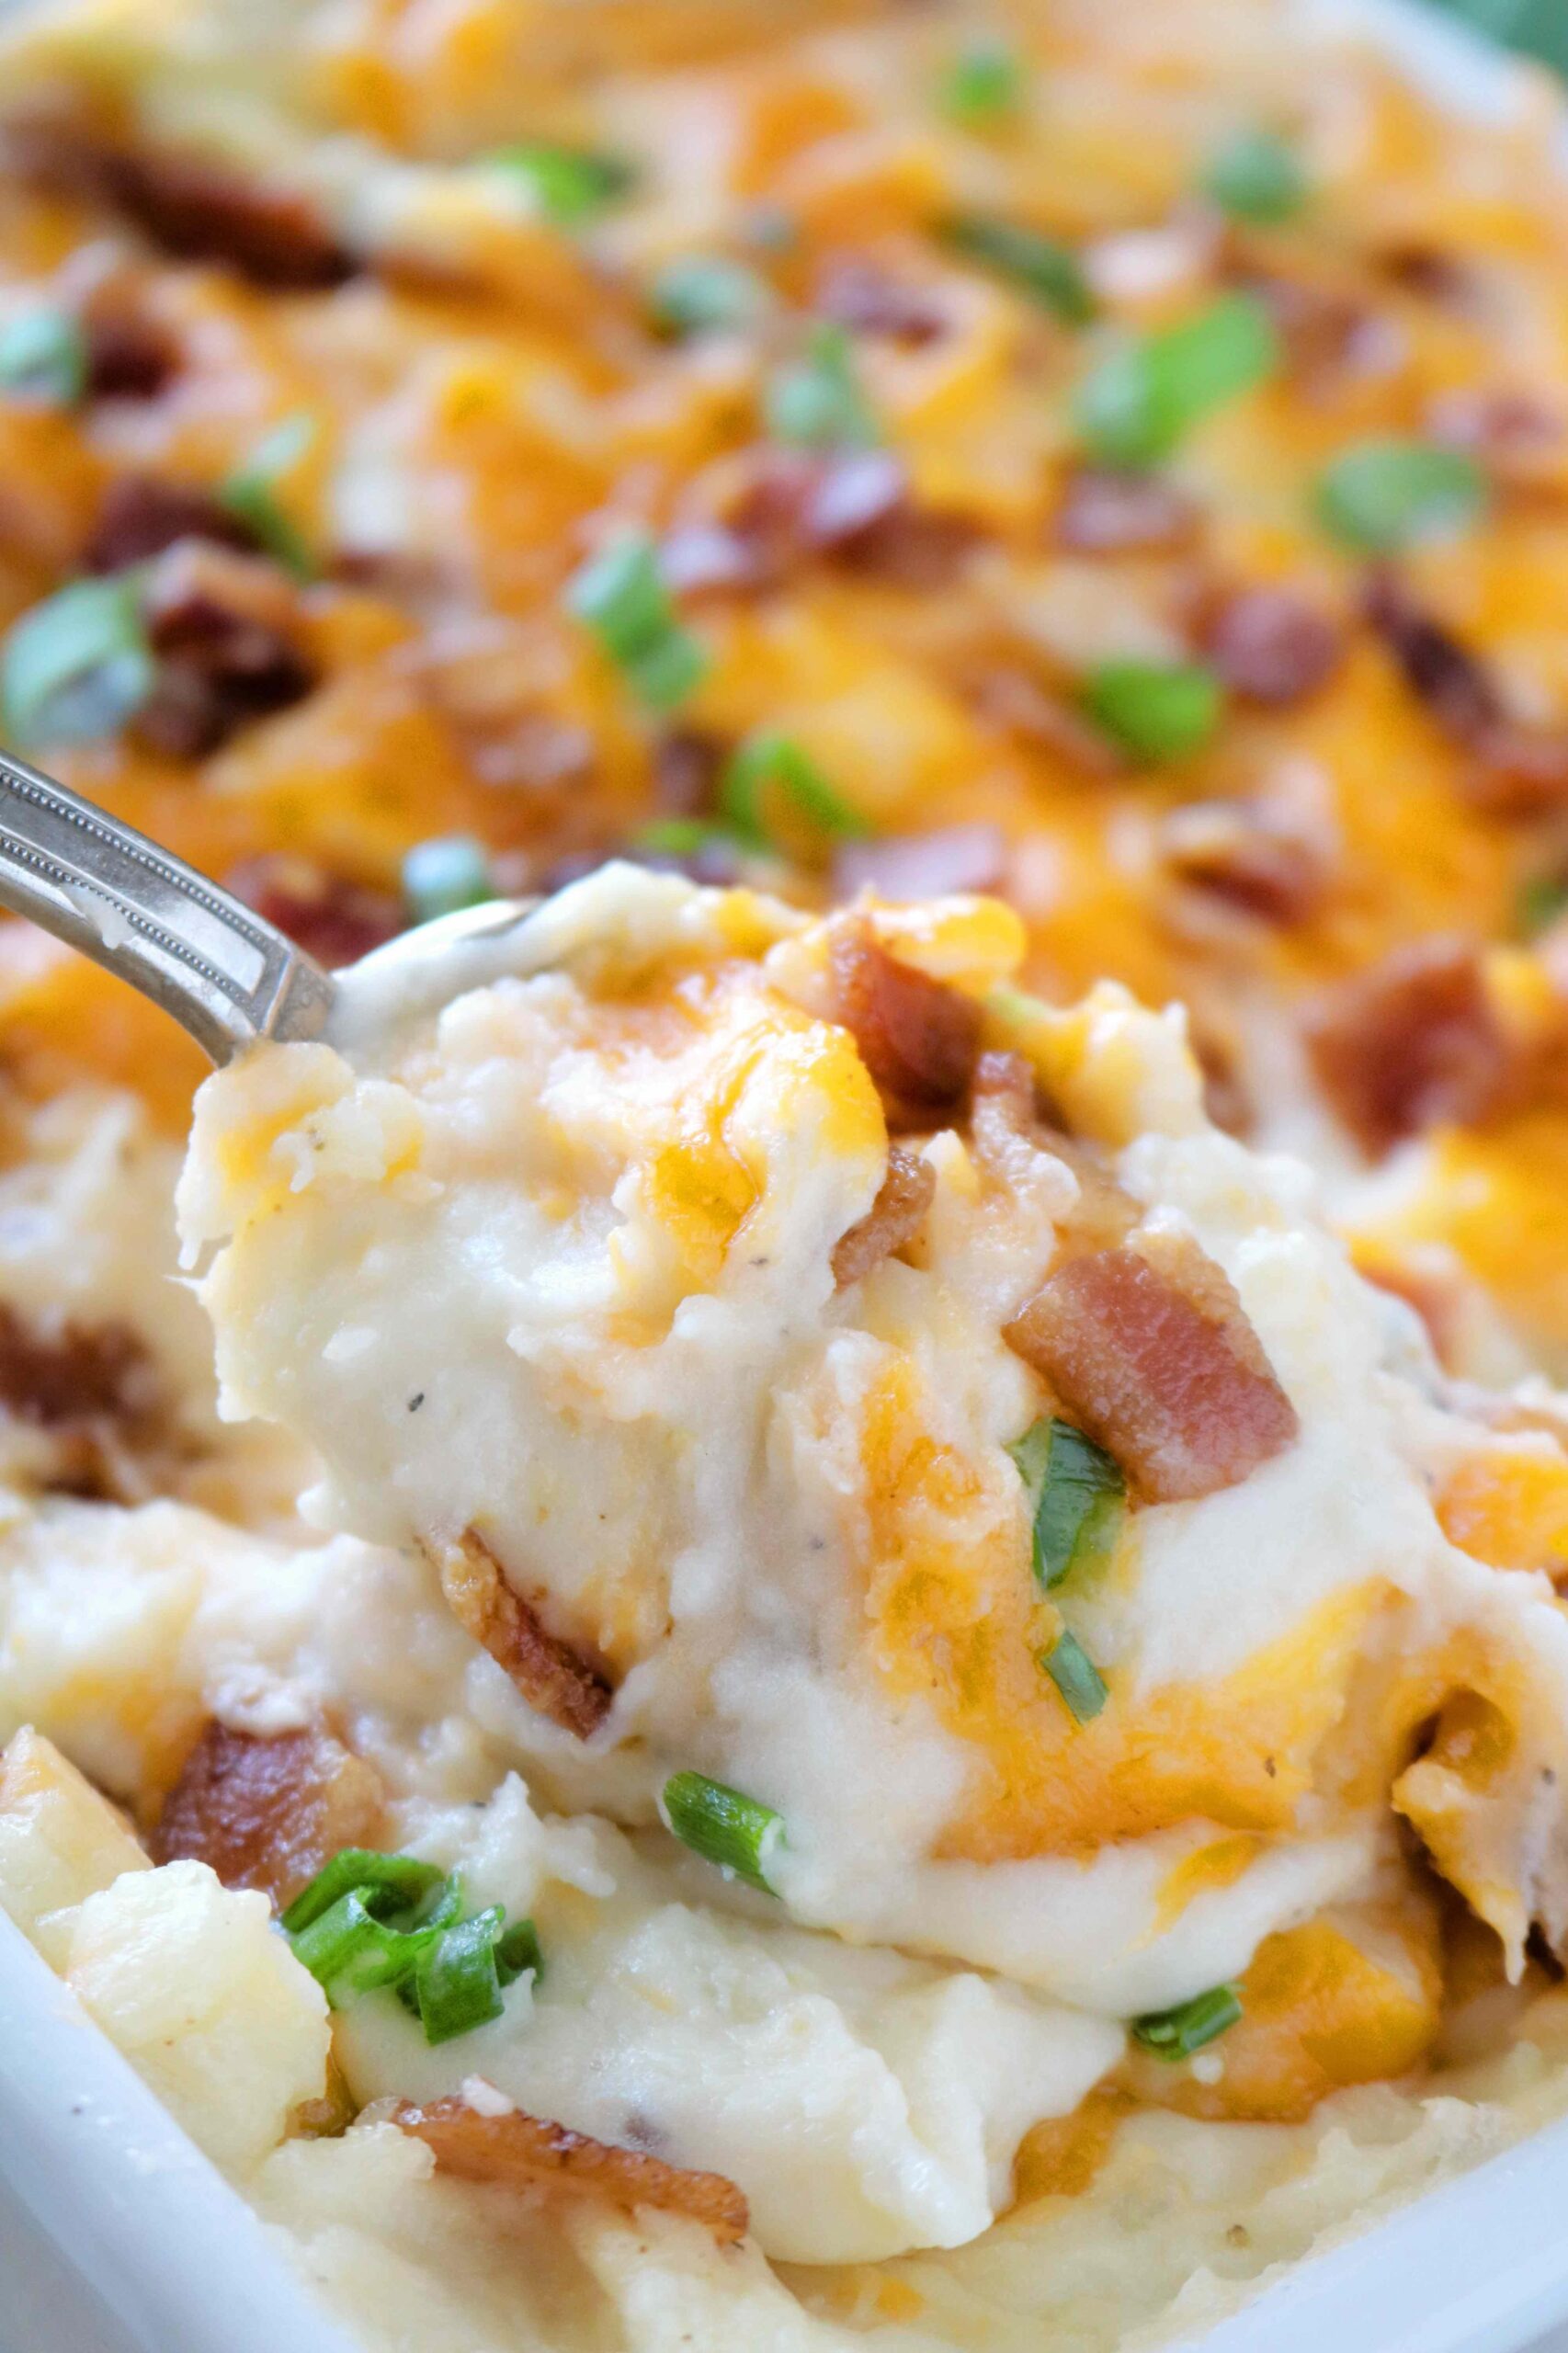  These loaded mashed potatoes are worth the extra calories.